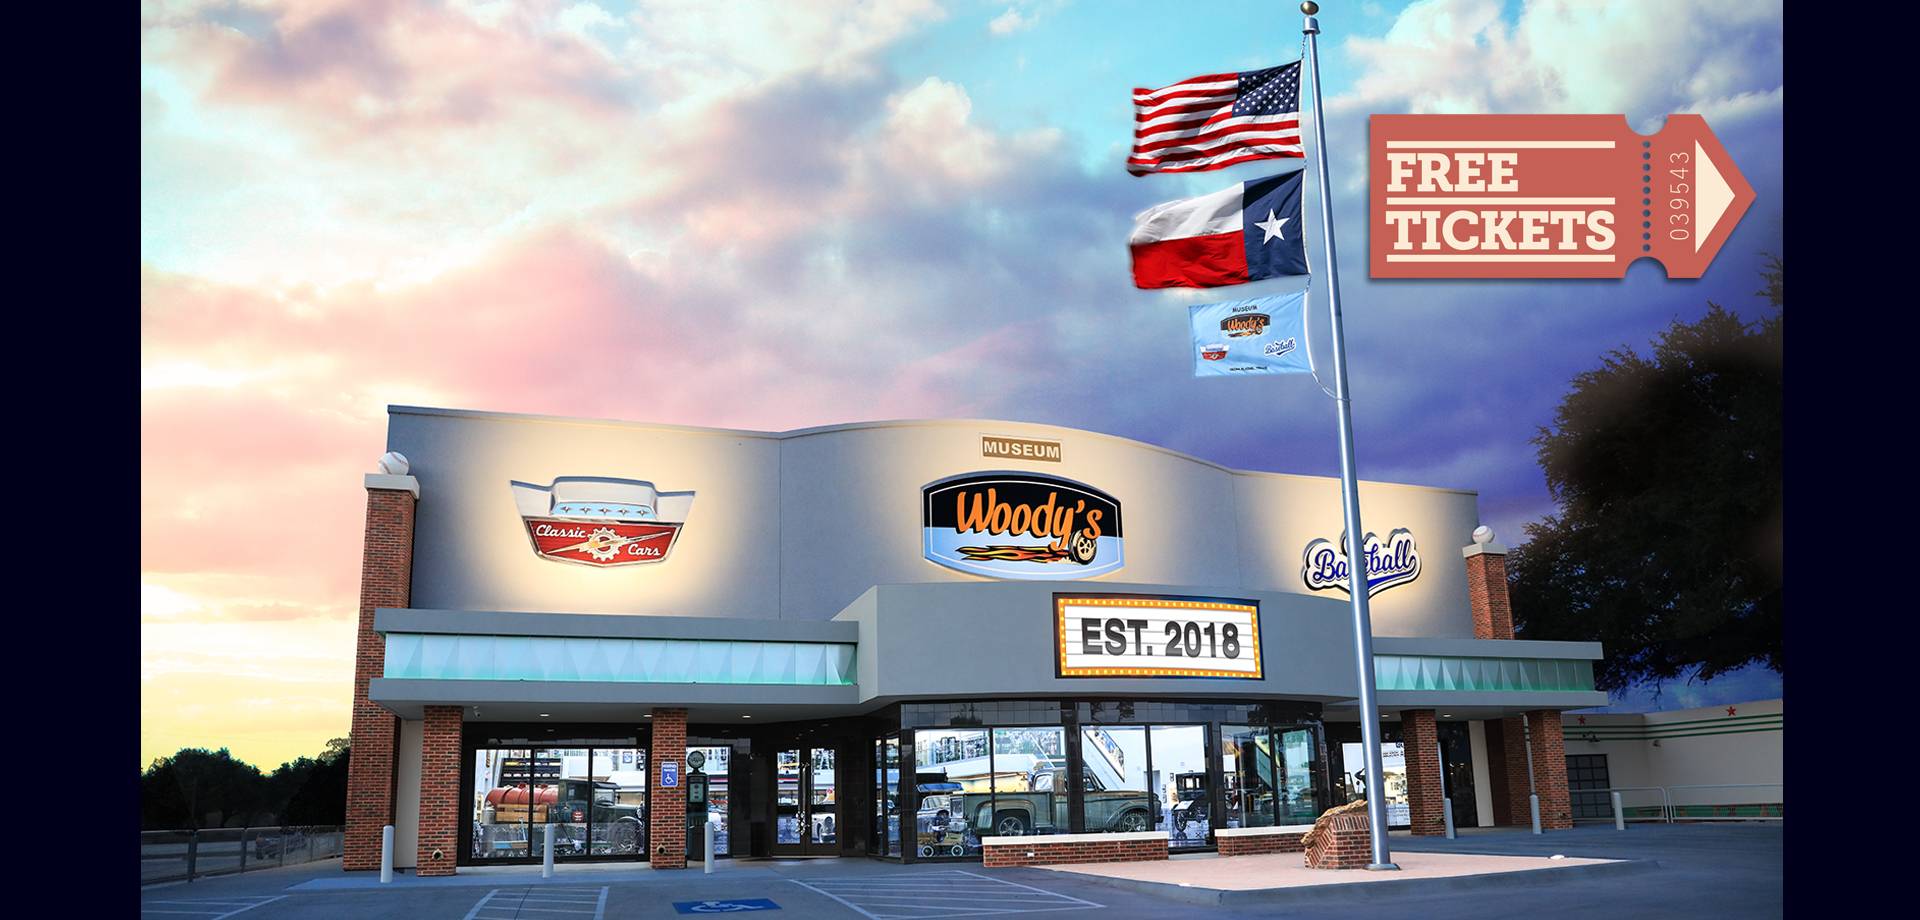 22,000 sq ft of great american classic cars and timeless baseball moments